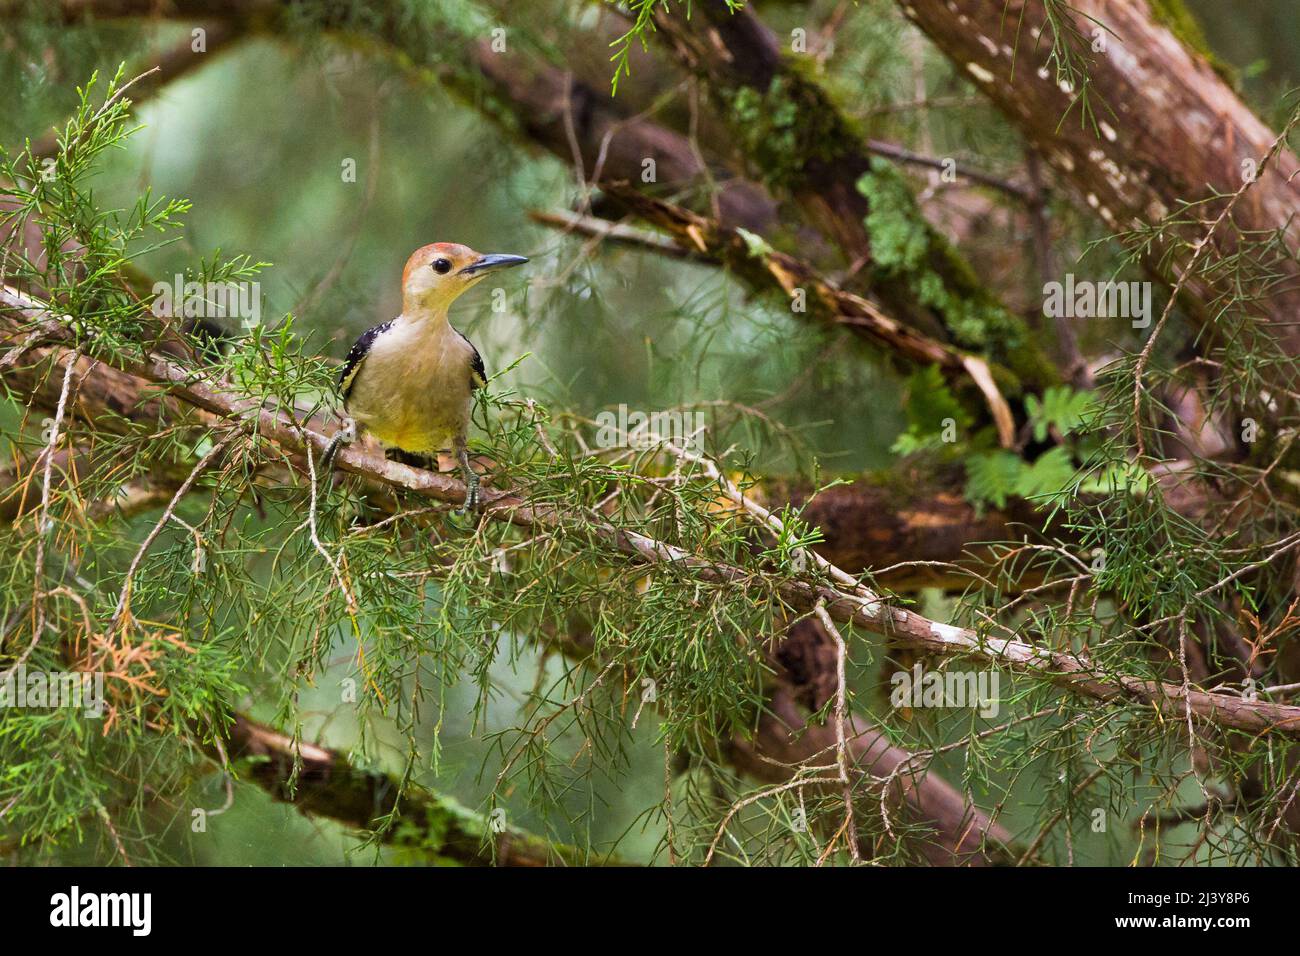 A young red-bellied woodpecker perched in a tree Stock Photo